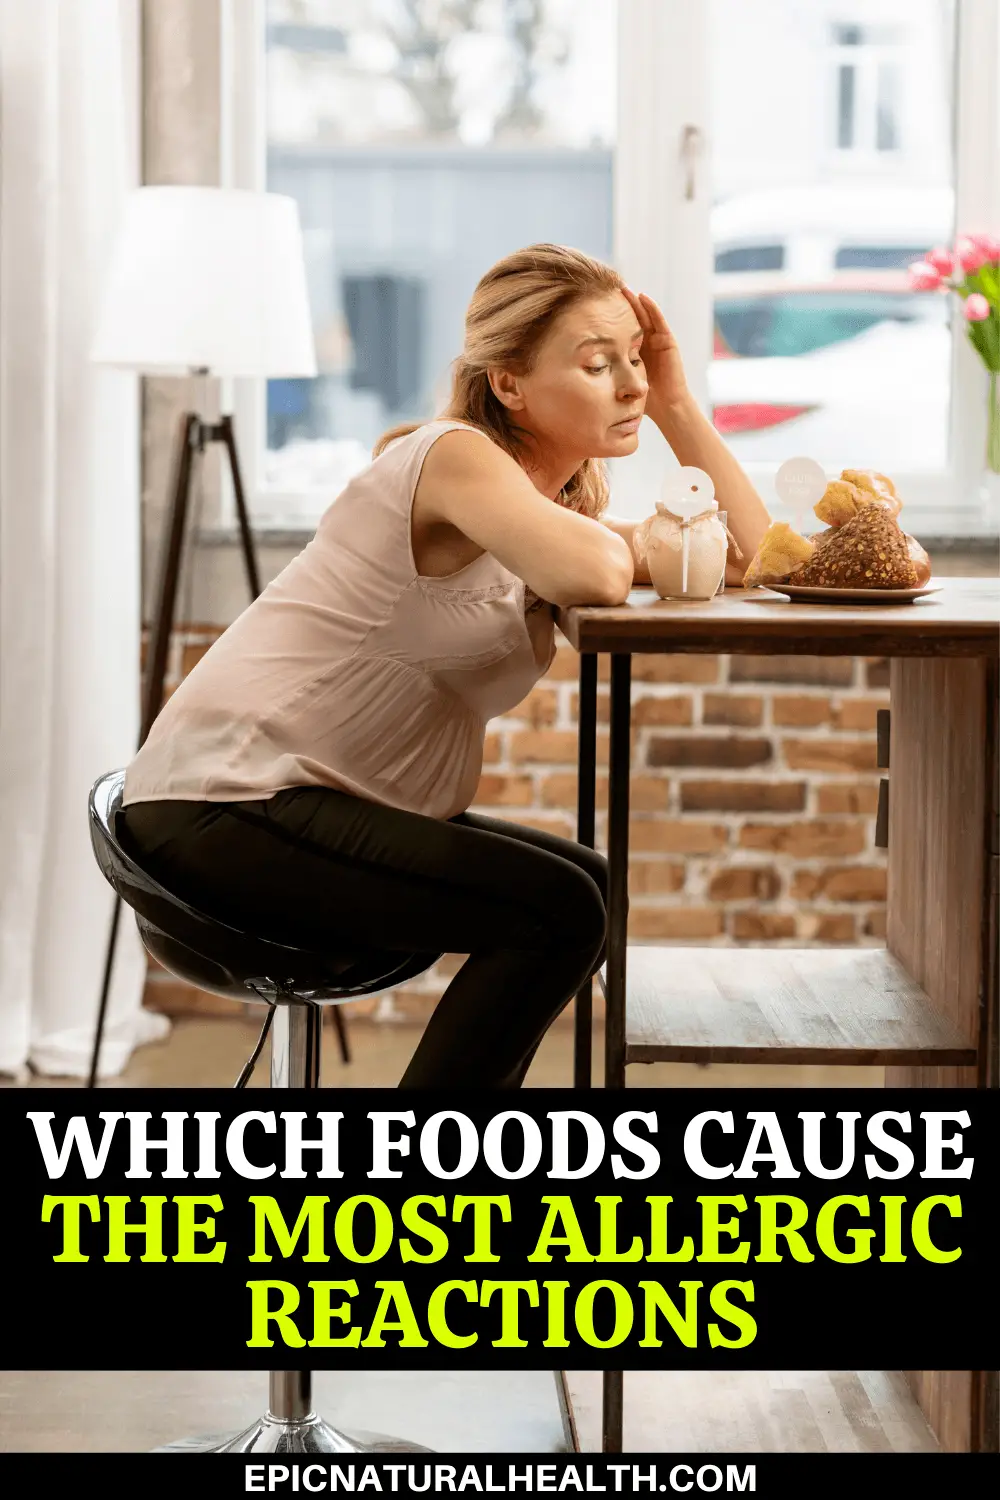 Which Foods Cause the most allergic reactions